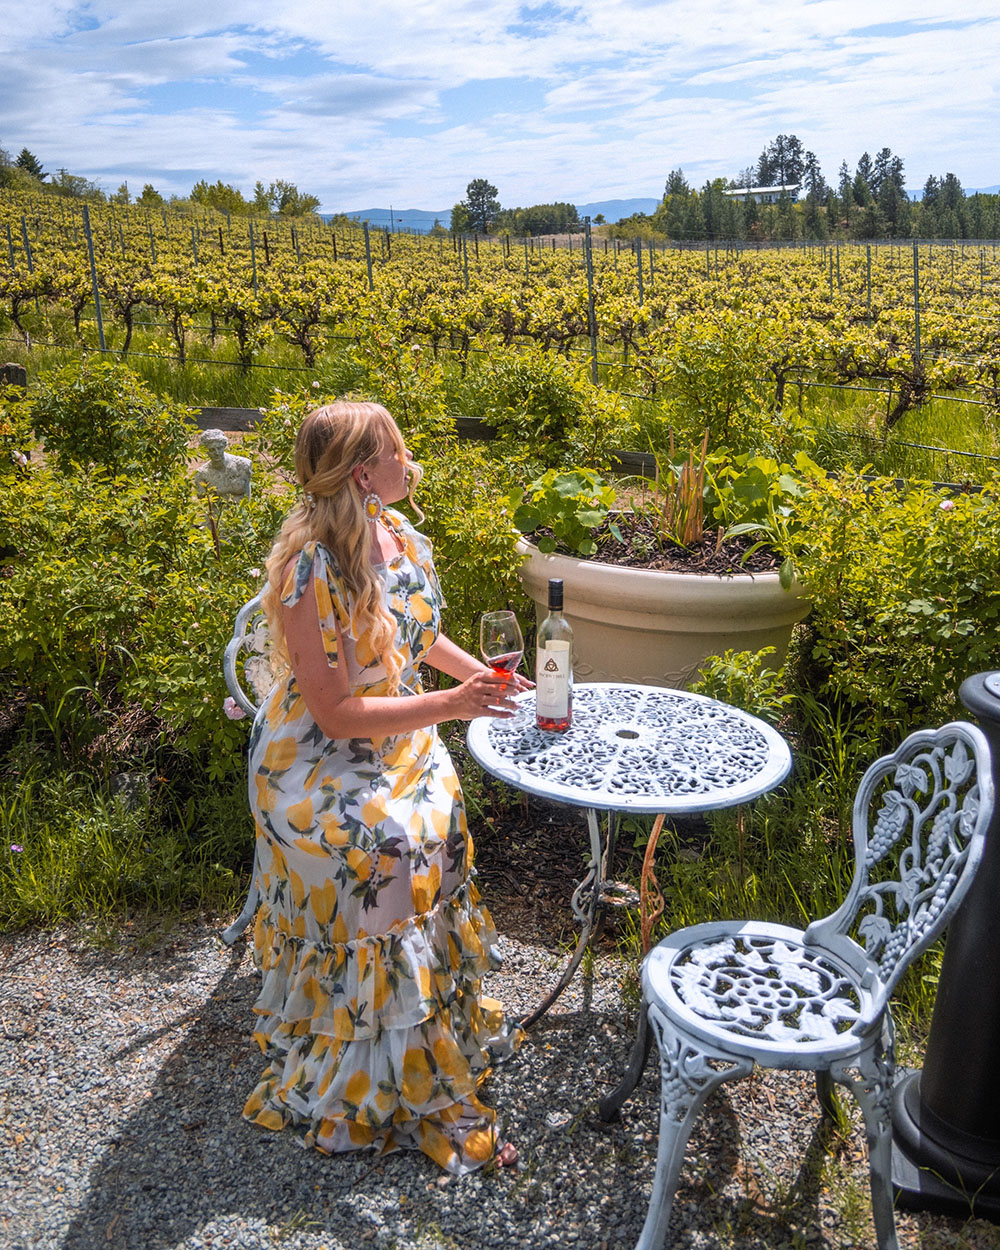 Looking for the best wineries in Kelowna for lunch? This guide is for you! Here's a list of the best Kelowna wineries with restaurants to enjoy an amazing lunch with wine in the sun.